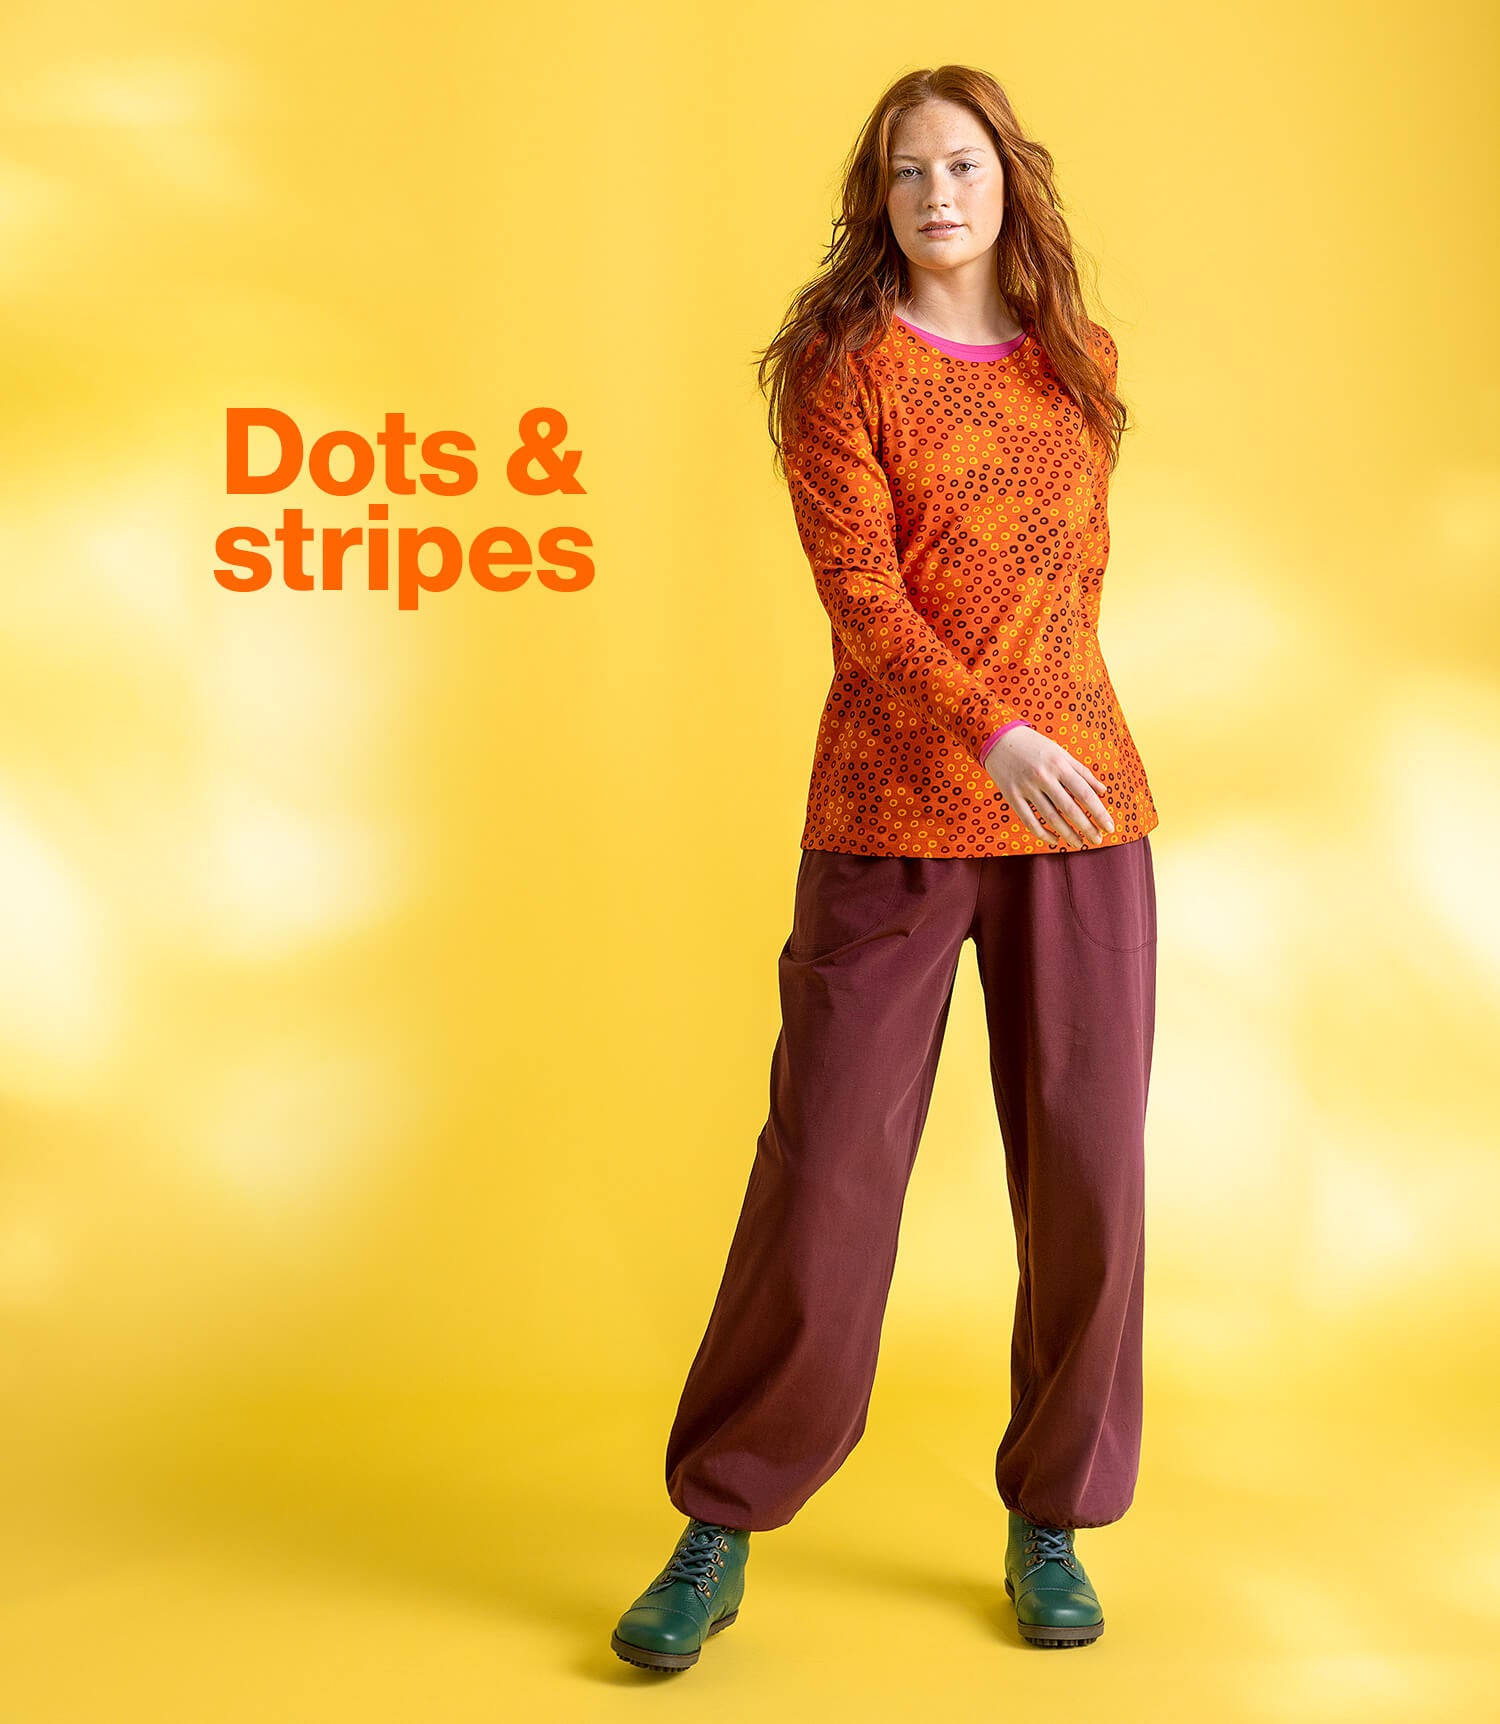 Delightful dots and playful stripes